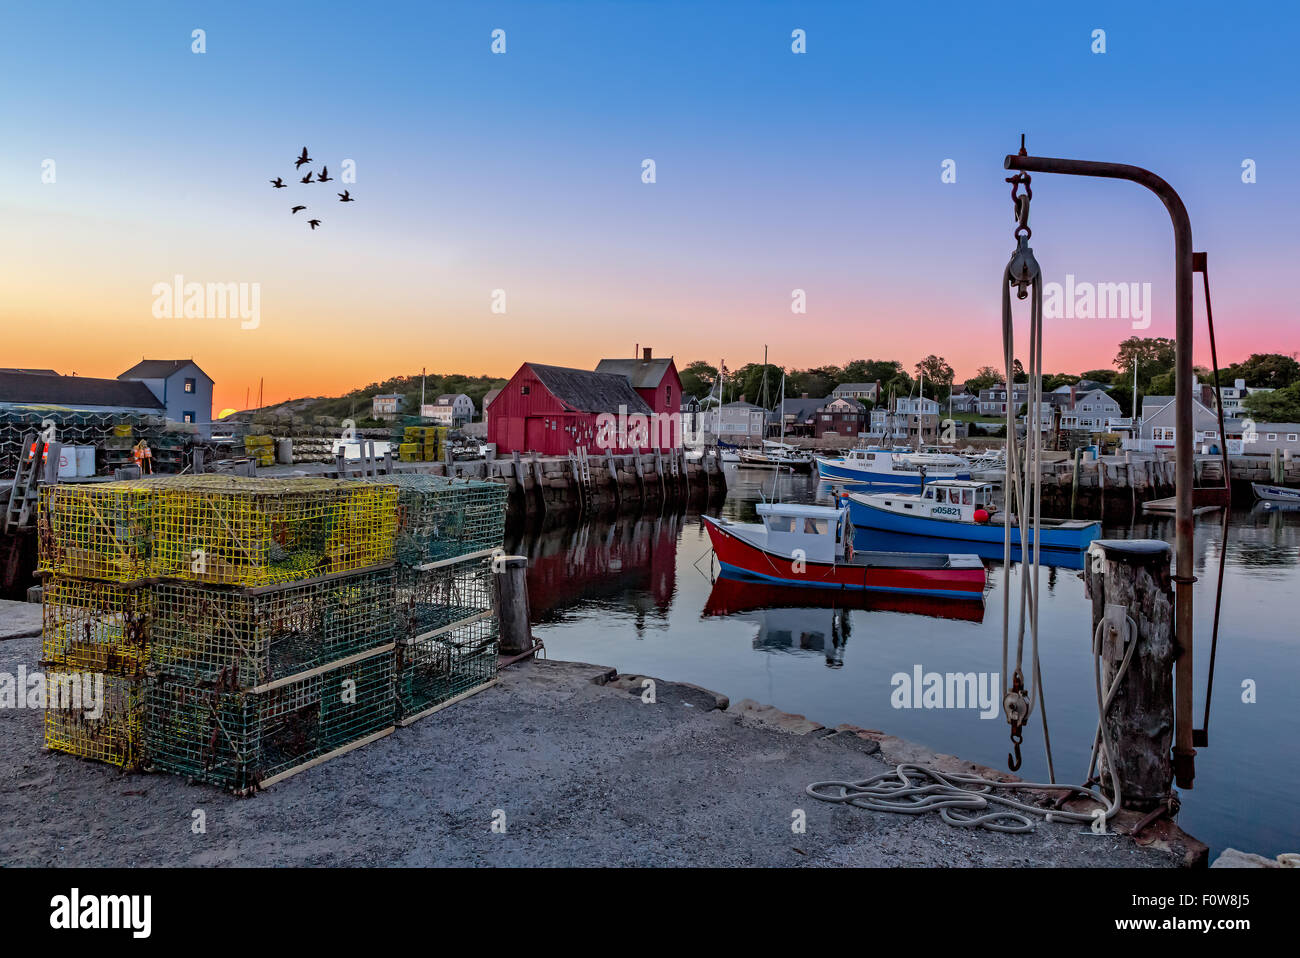 The quintessential New England Motif Number One sunrise. Located on Bradley Wharf in the harbor town of Rockport. Motif Number One has been a long time favorite subject for artist, due to its location, lighting, composition as well as it being a symbol of New England maritime life. Stock Photo